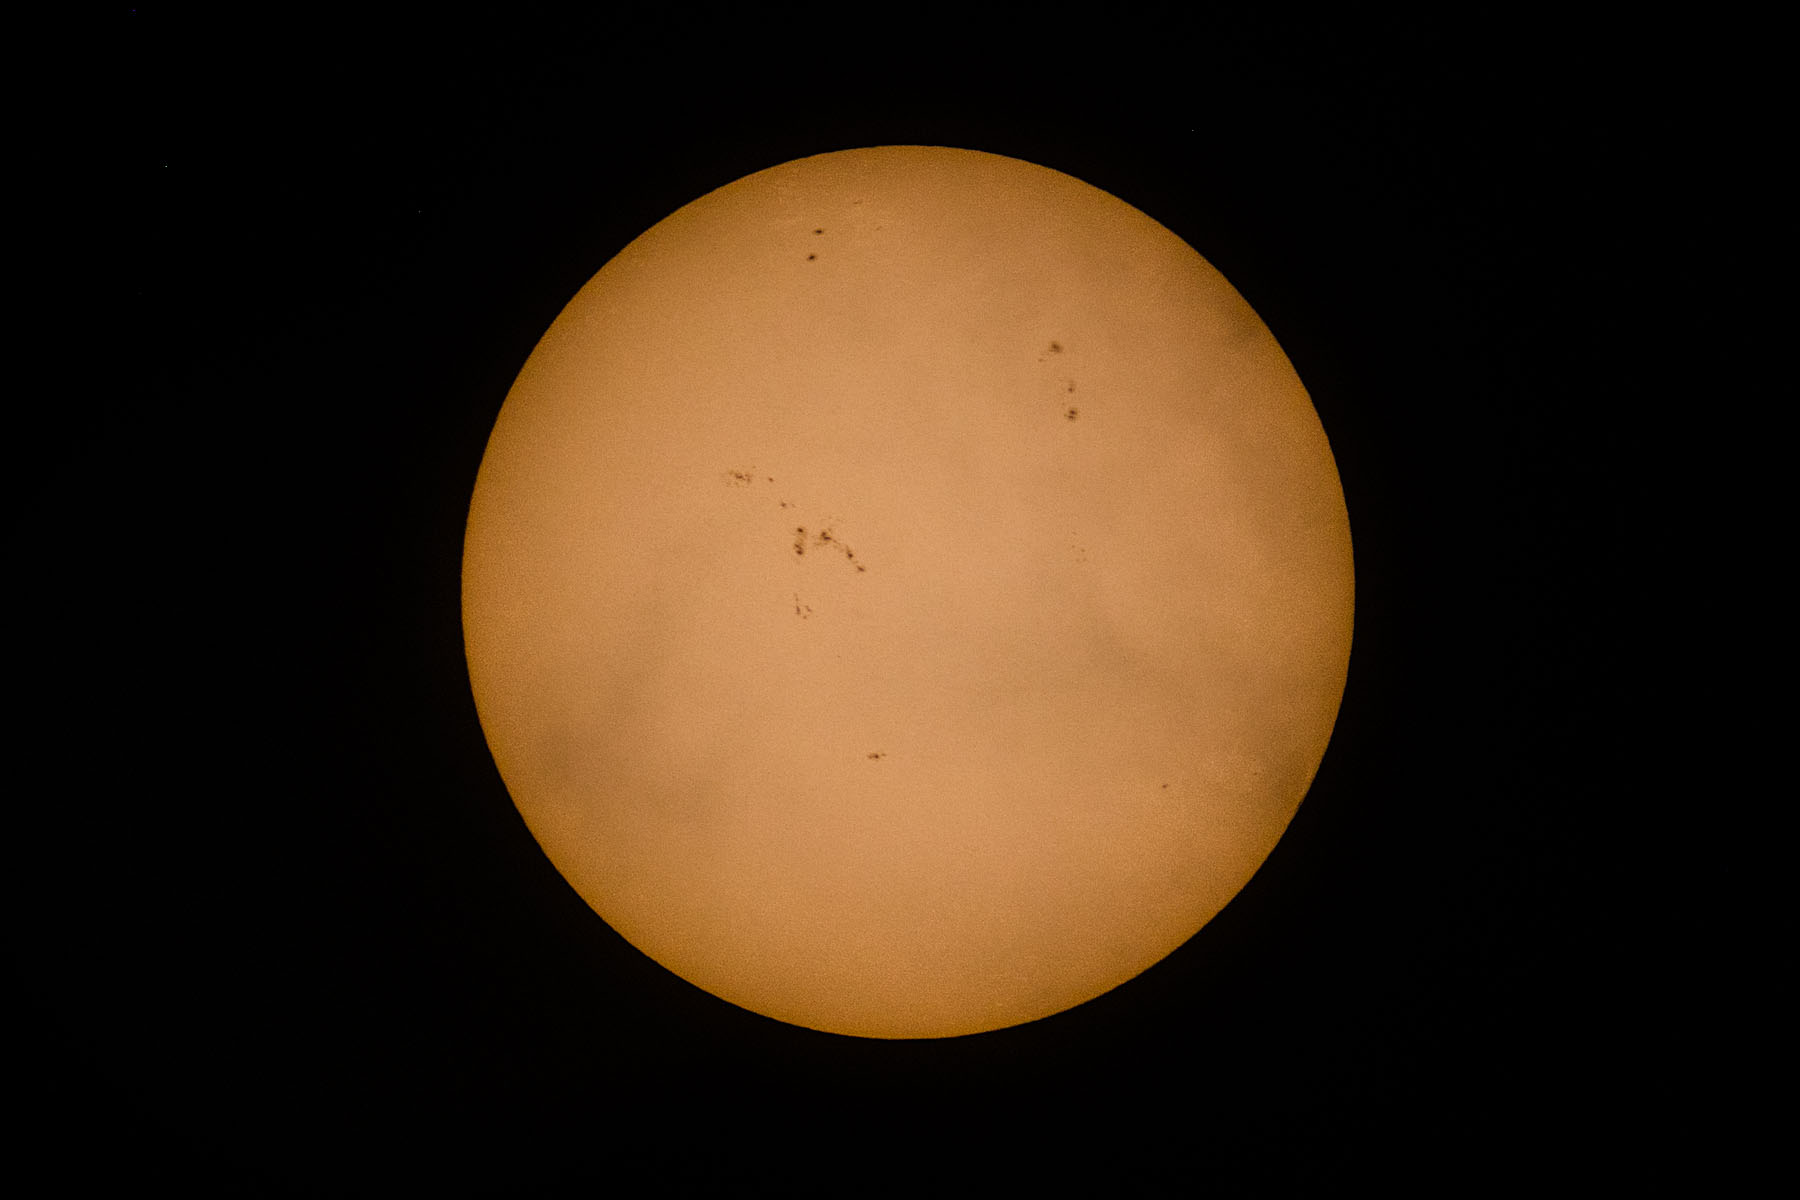 Two days after the previous image, trying out new T-mount and eyepiece adapter with some high clouds passing in front of the sun.  Shot through Televue telescope with M100 camera, prime focus.  Click for next photo.